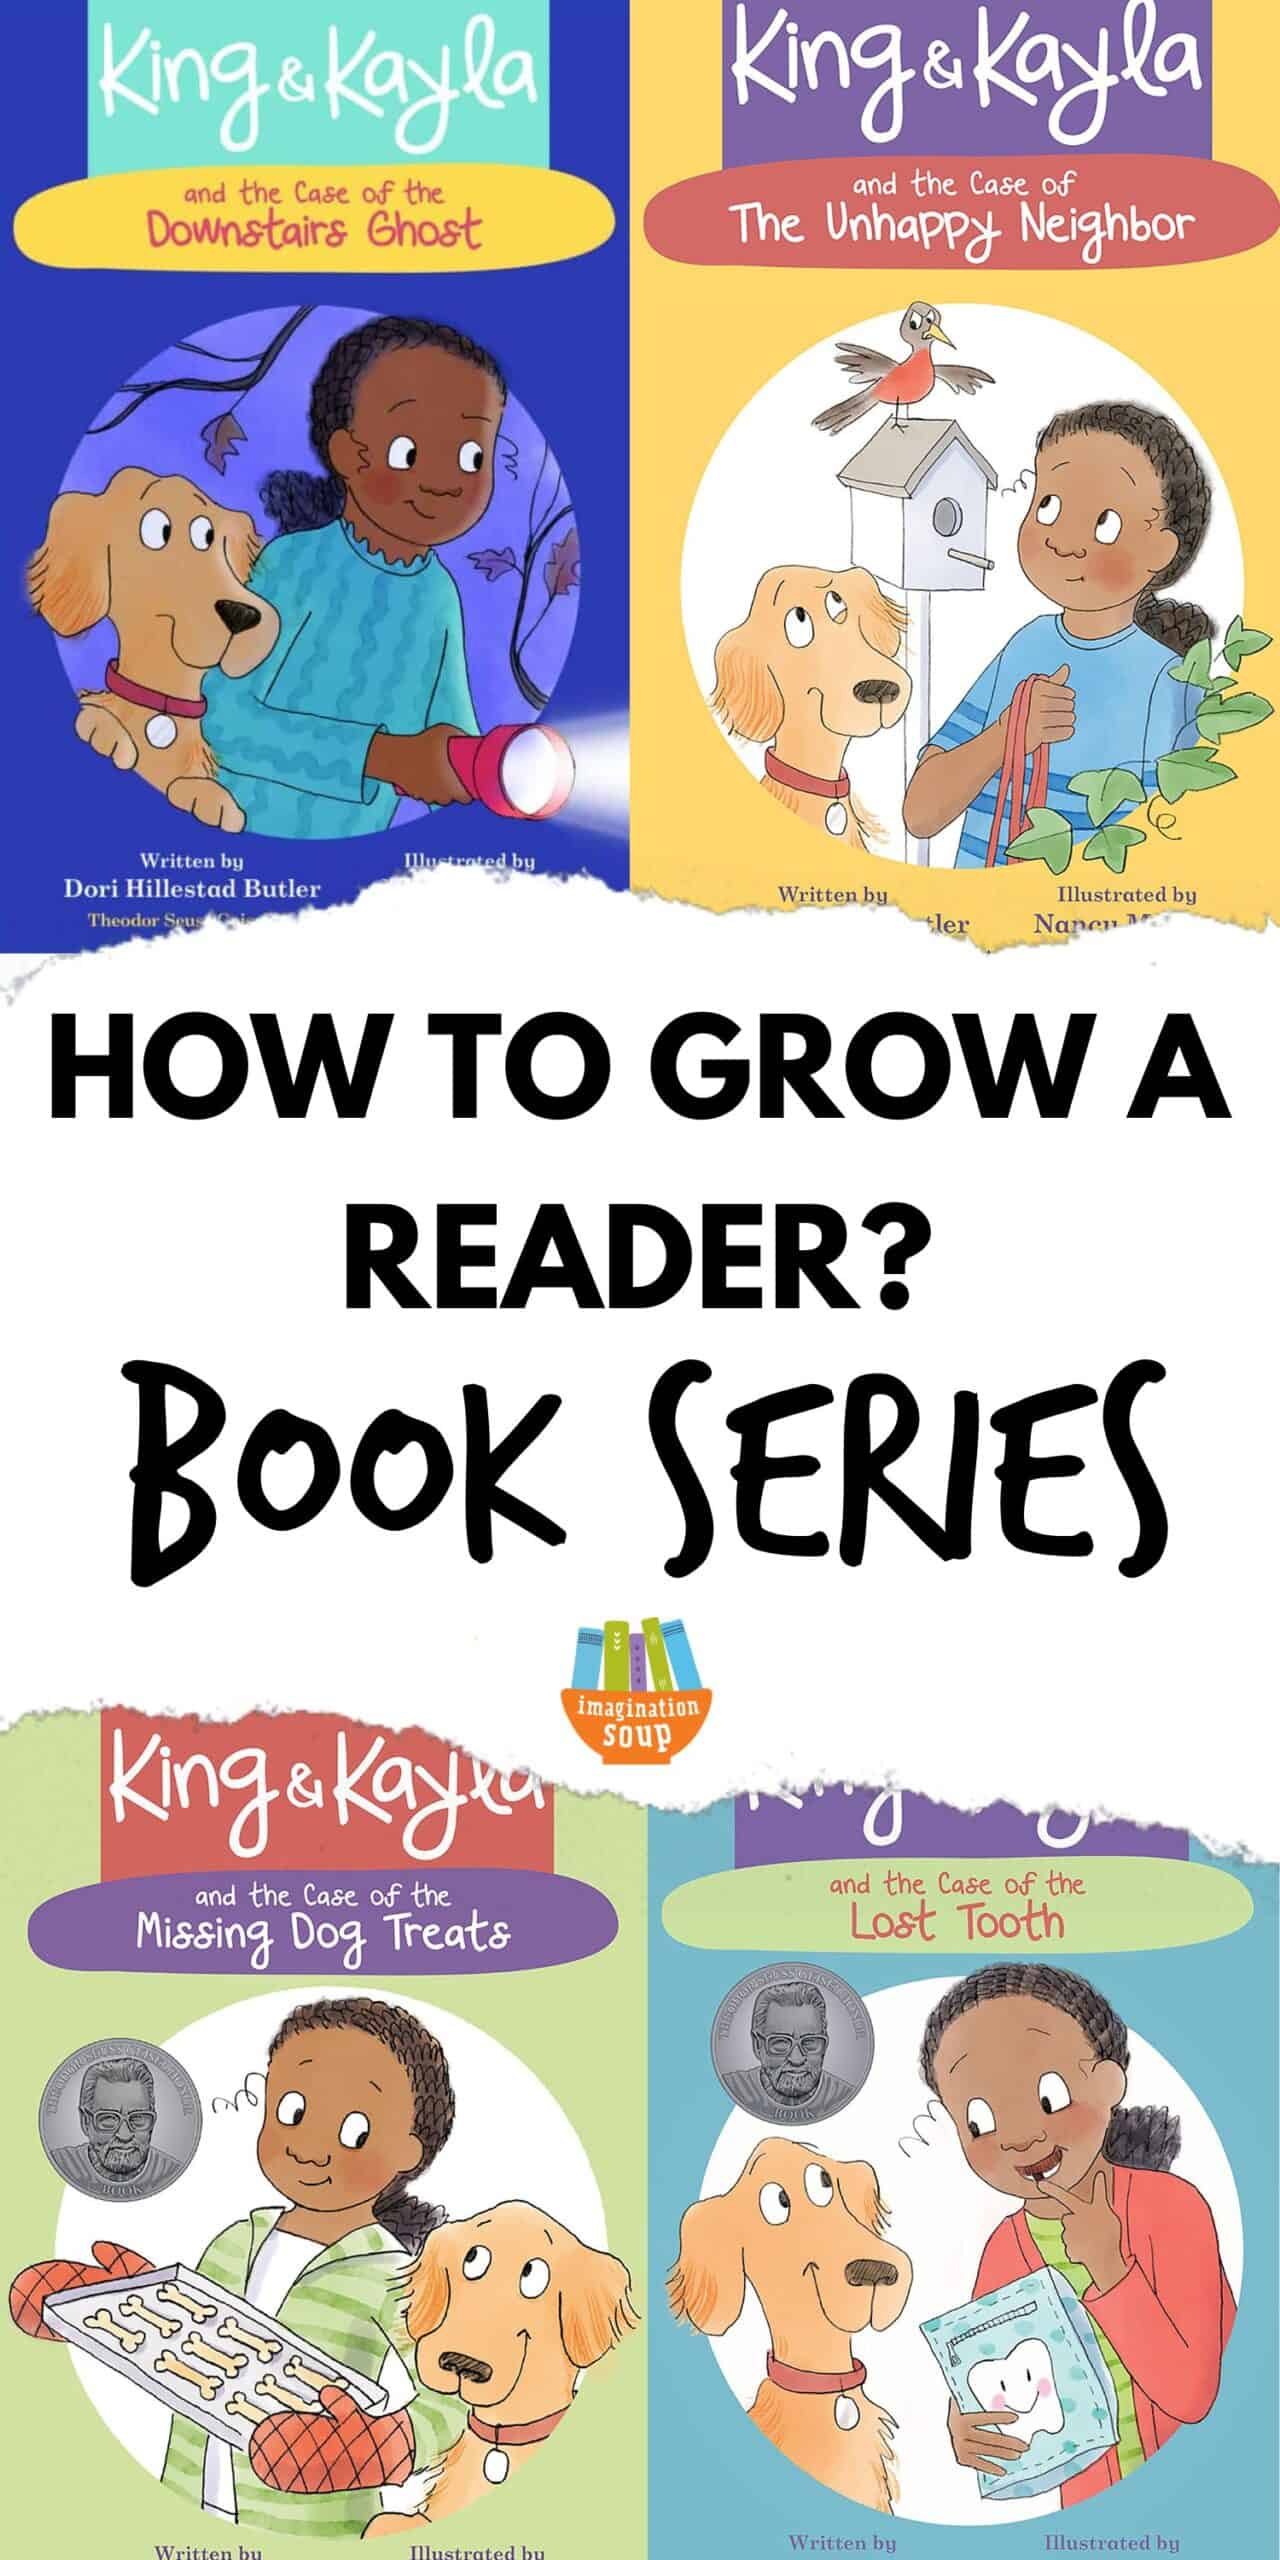 How to Grow a Reader? Turn them on to a new series!